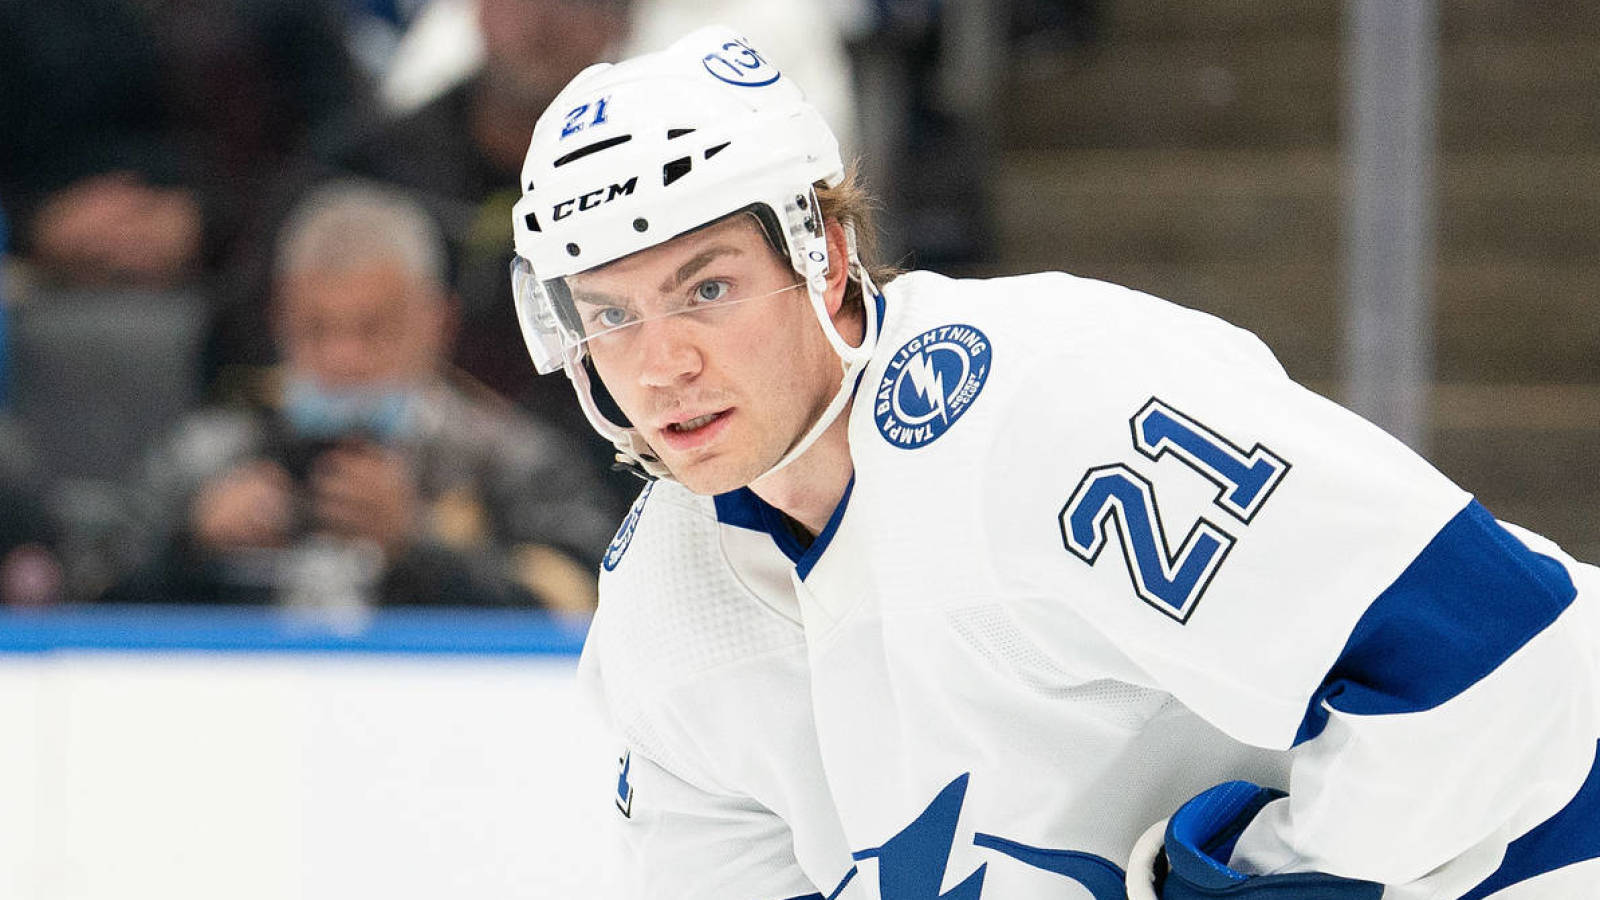 Brayden Point scores twice as Lightning dump Predators - The Rink Live   Comprehensive coverage of youth, junior, high school and college hockey